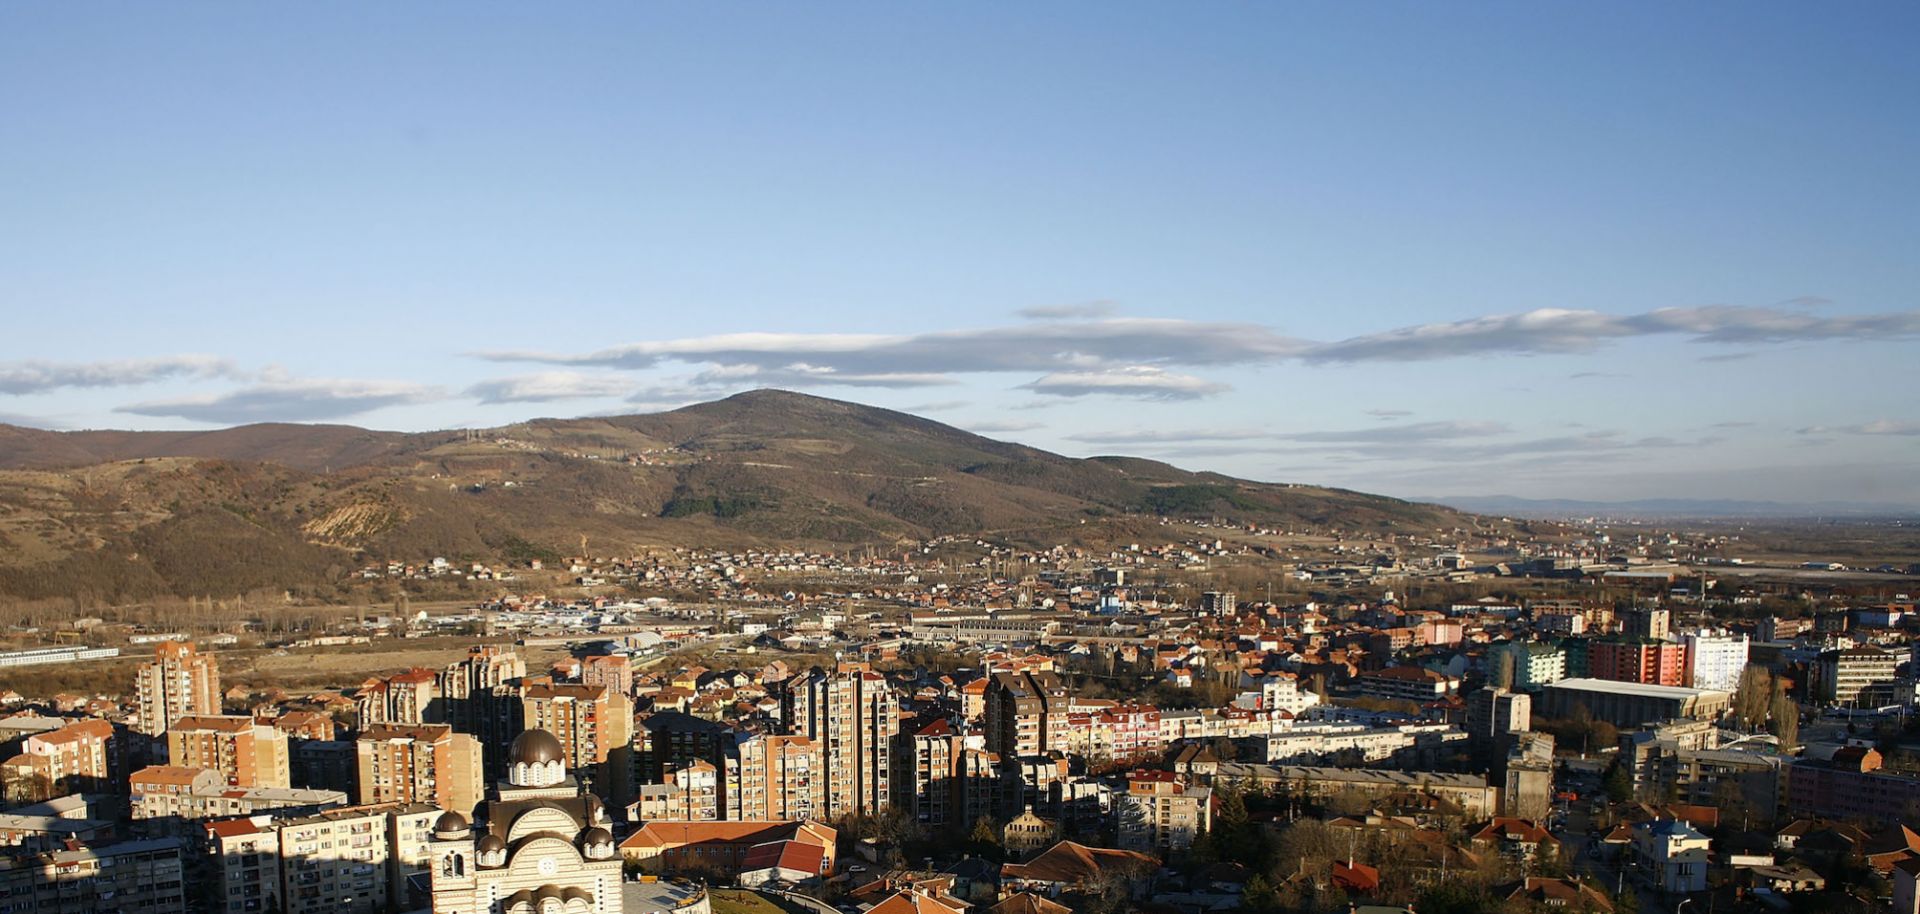 A view of the town of Mitrovica